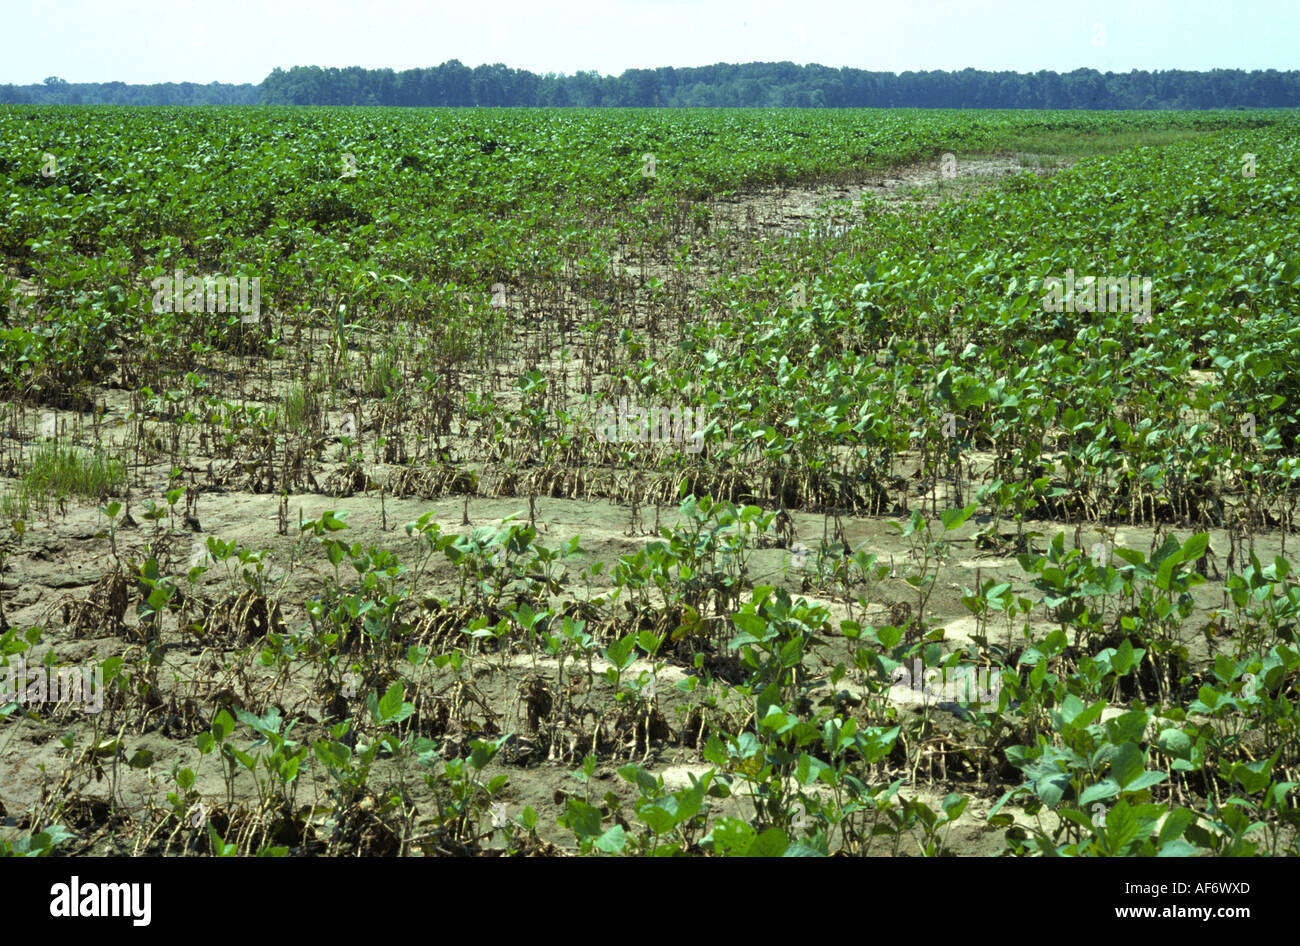 Young soyabean crop severely affected by heavy rain Mississipi USA Stock Photo